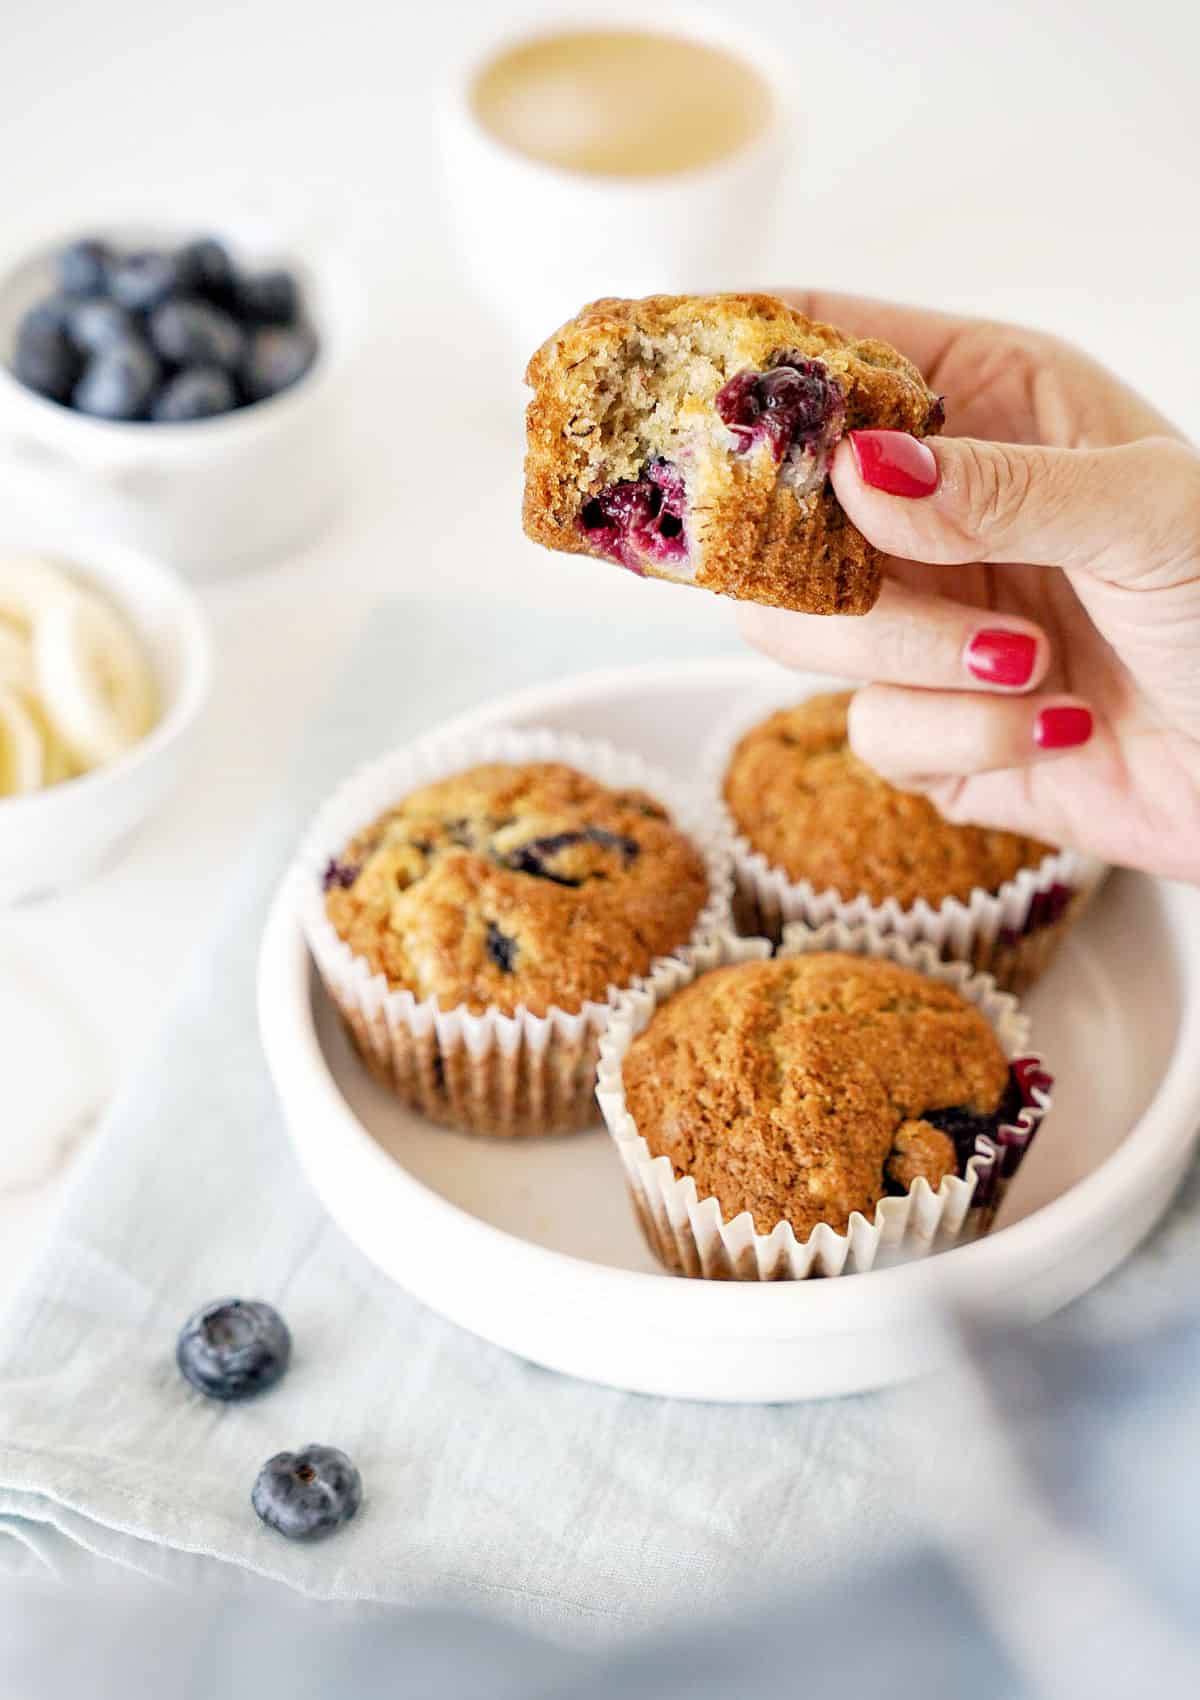 Holding a bitten blueberry banana muffin over white plate with wole ones. White surface with fruit in bowls.